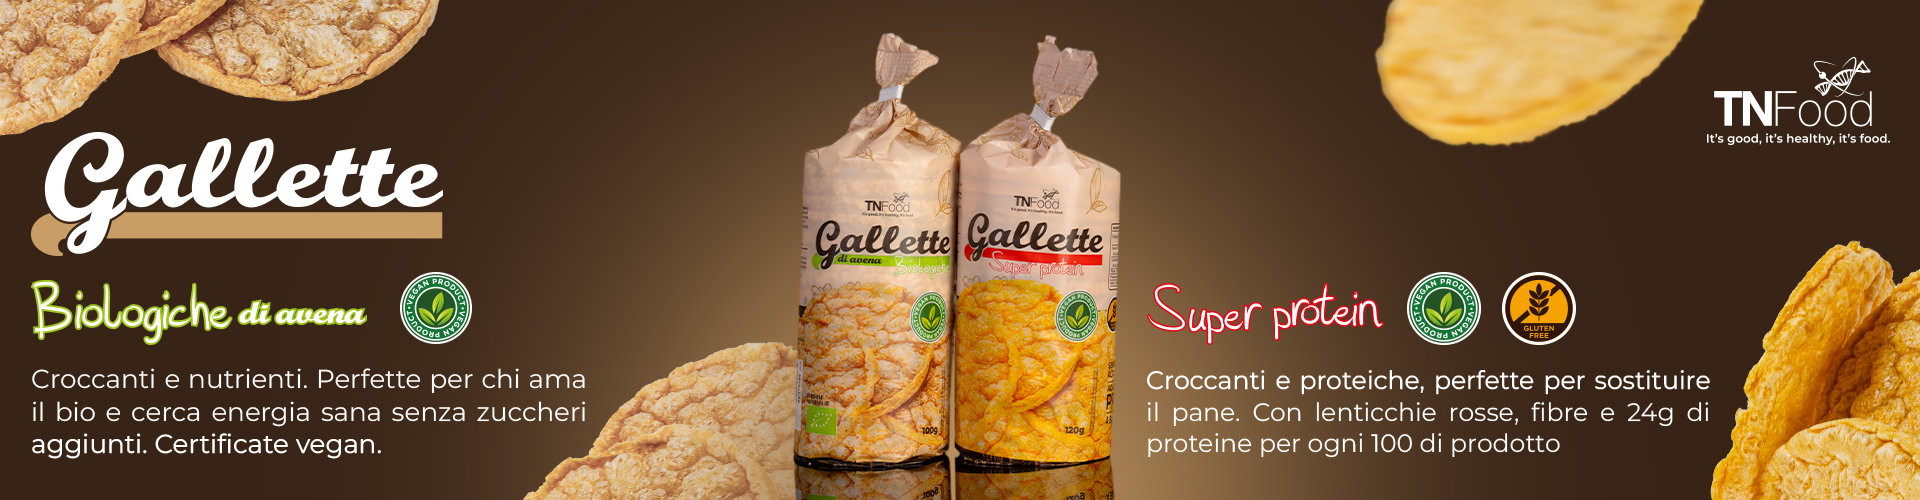 NEW PRODUCT GALLETTE 